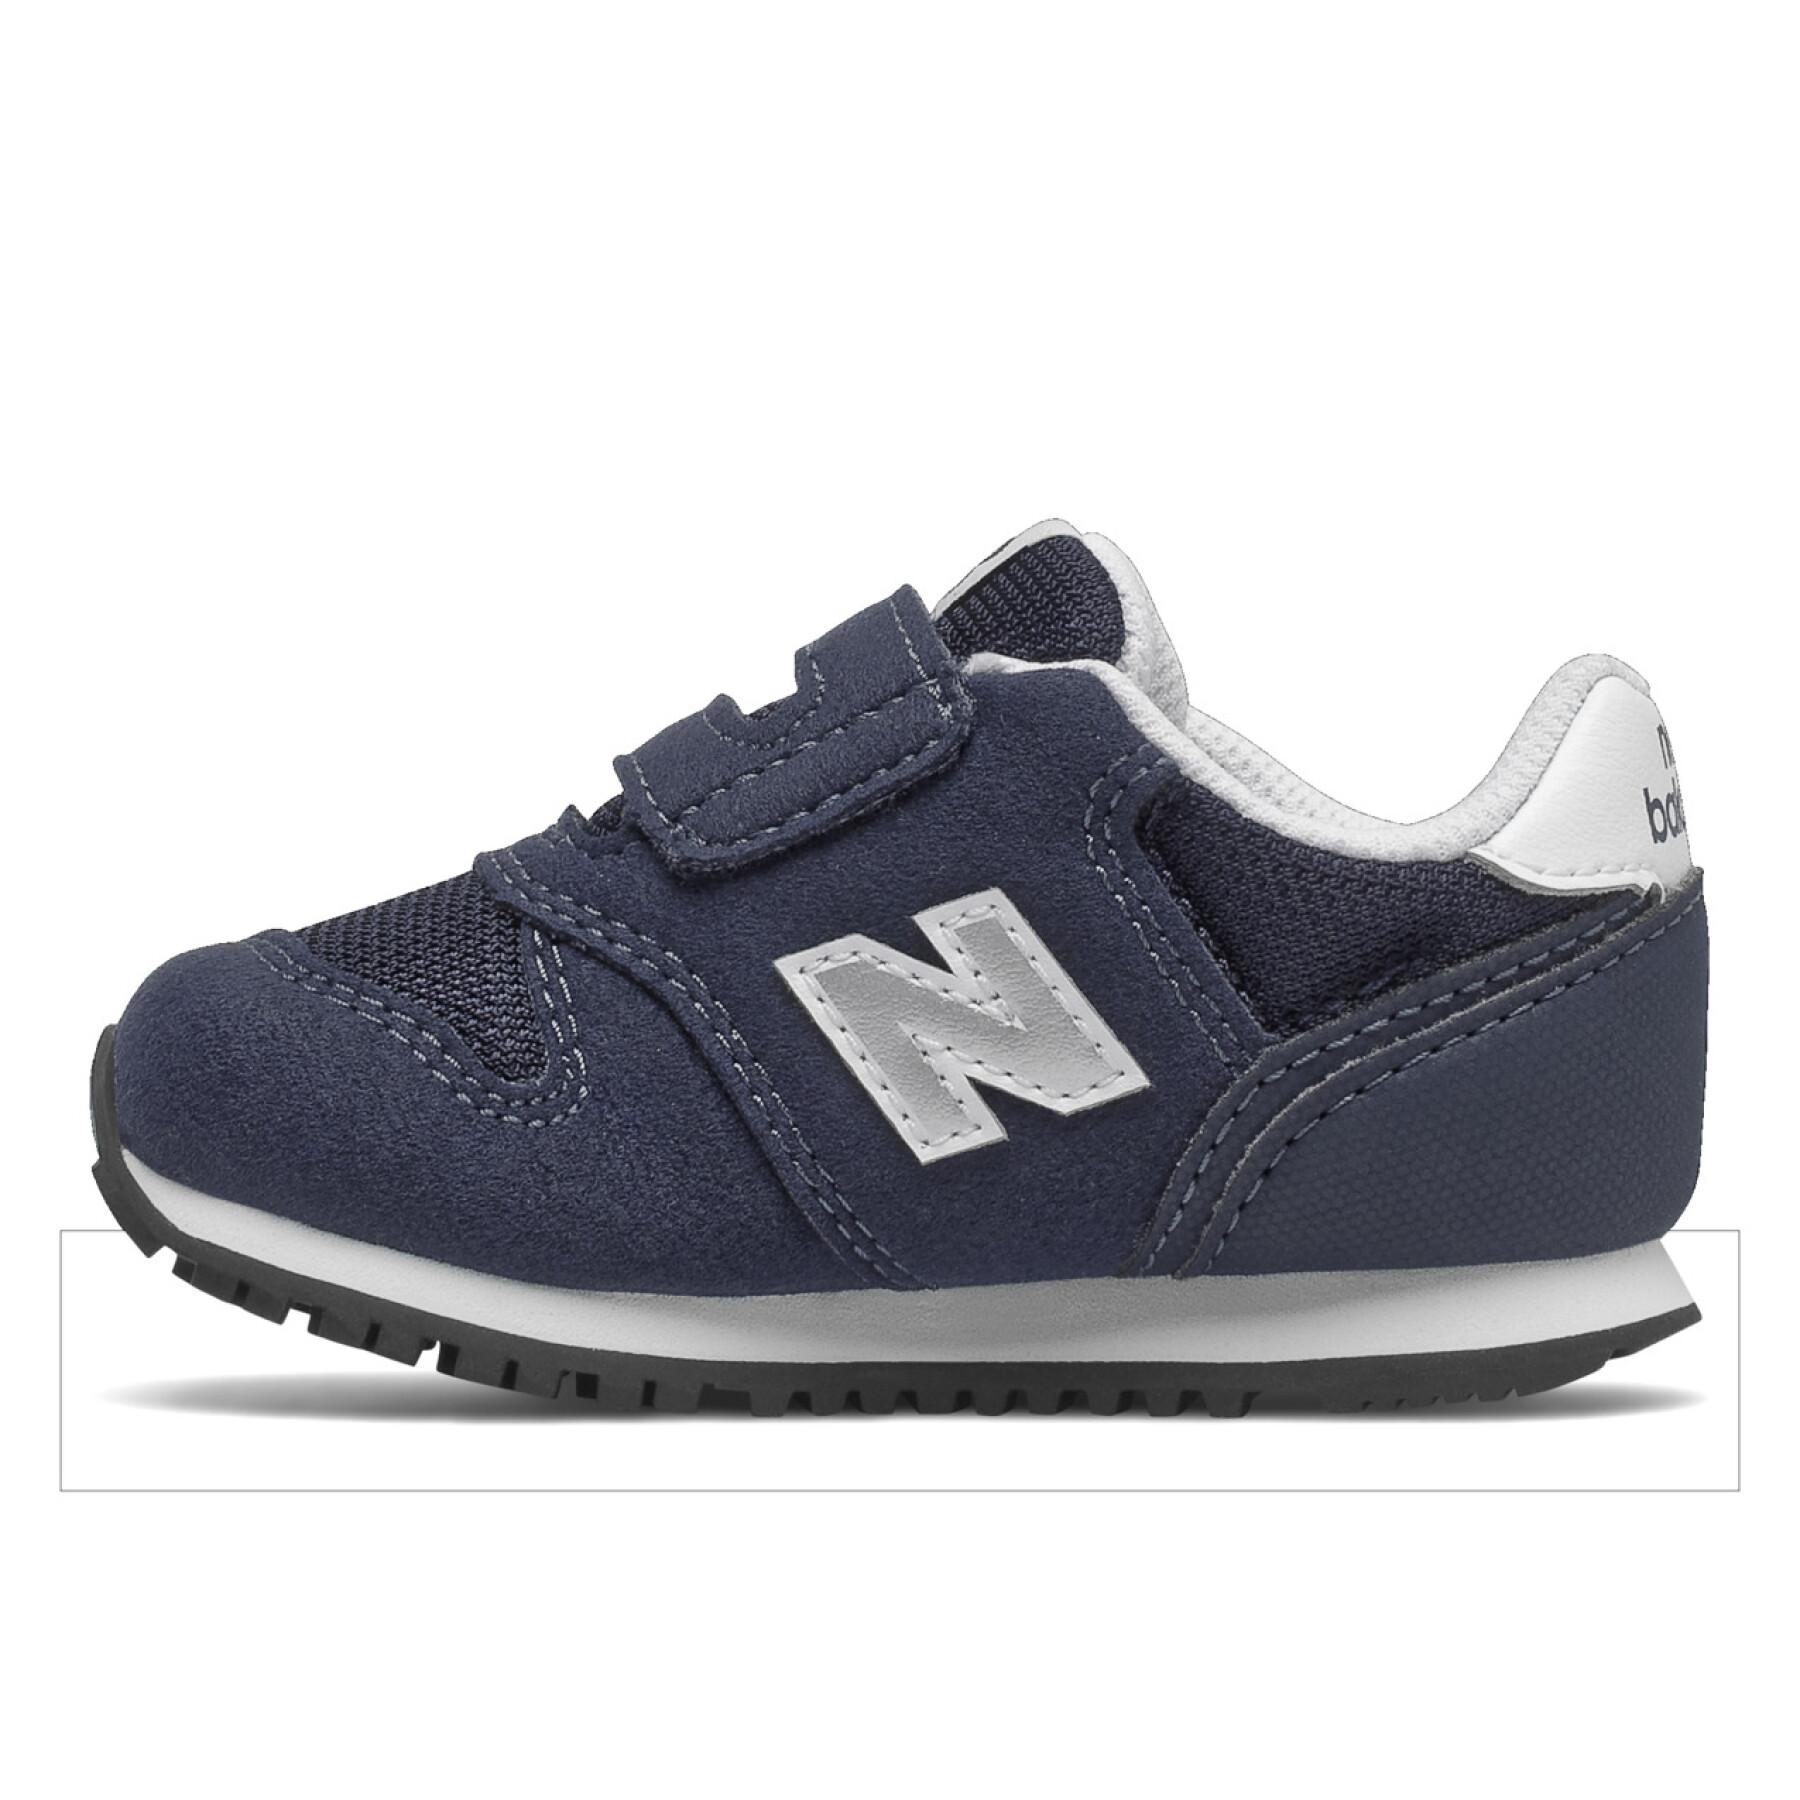 Baby shoes New Balance girls pack